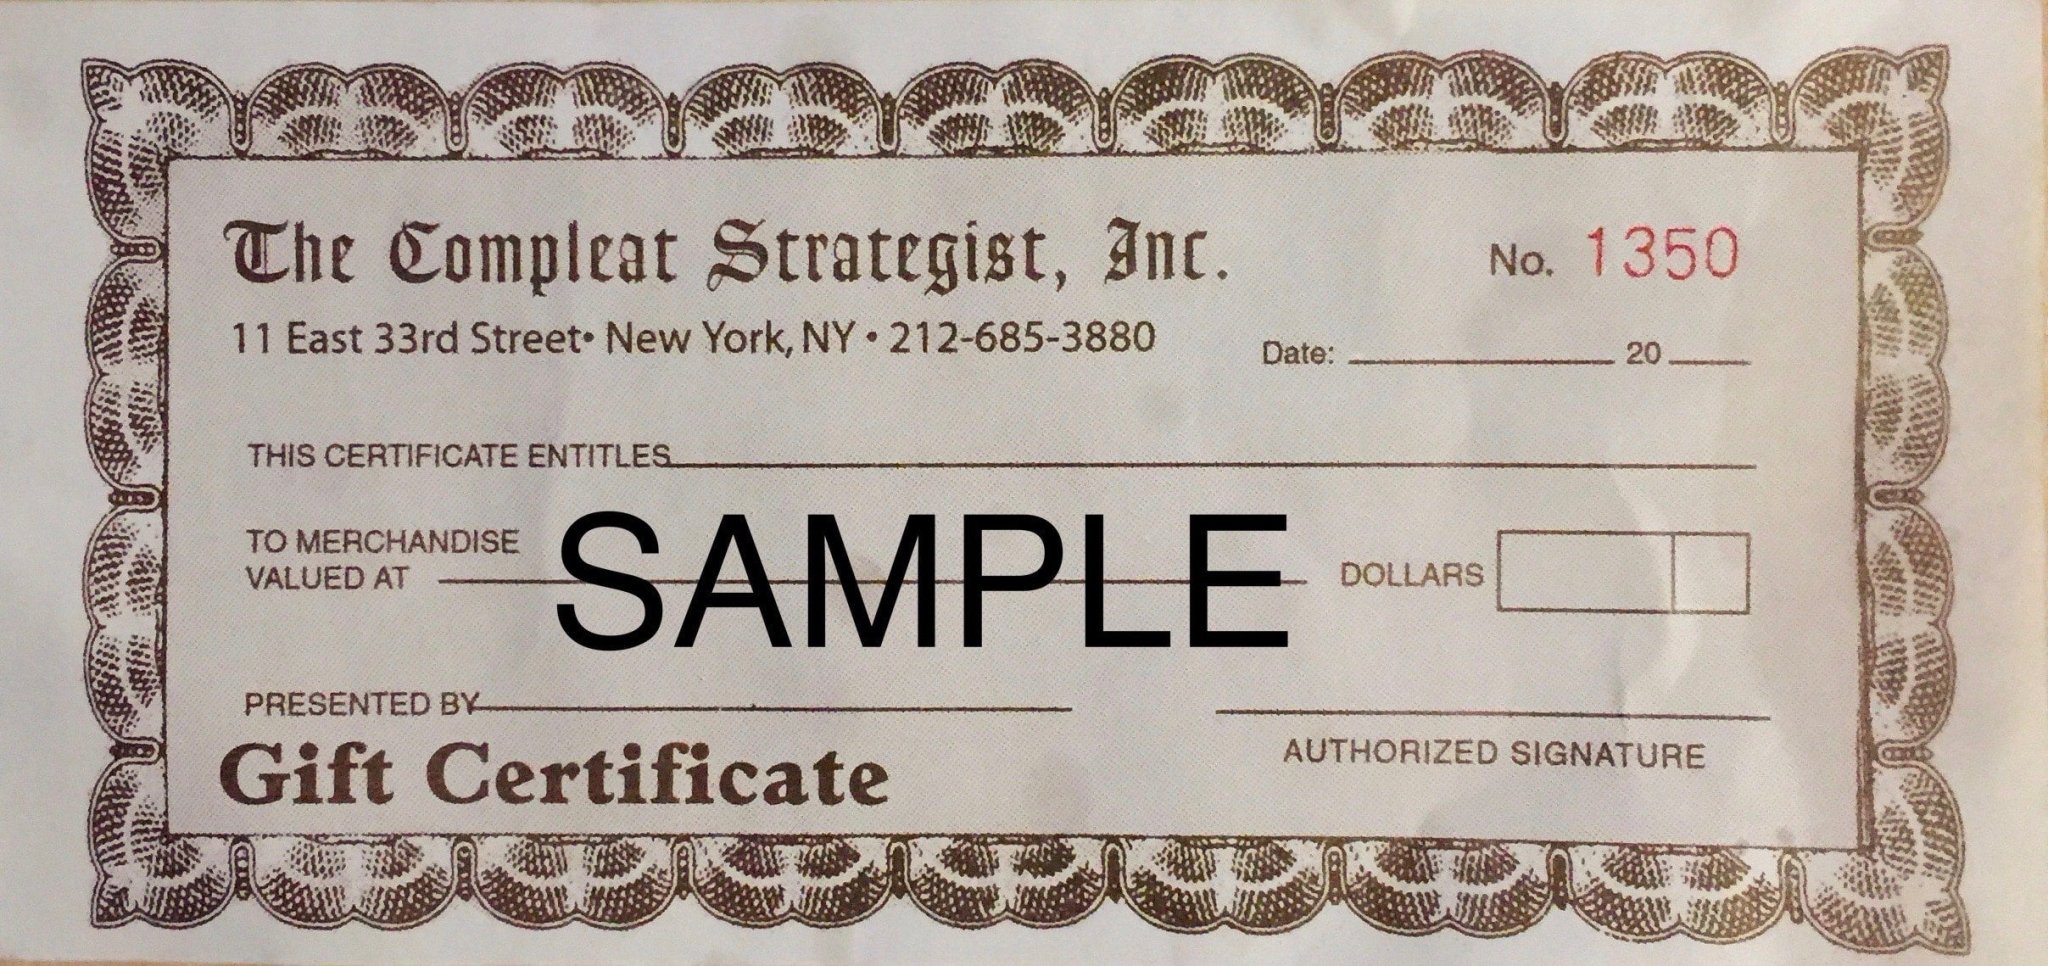 The Compleat Strategist Gift Certificates and Gift Cards